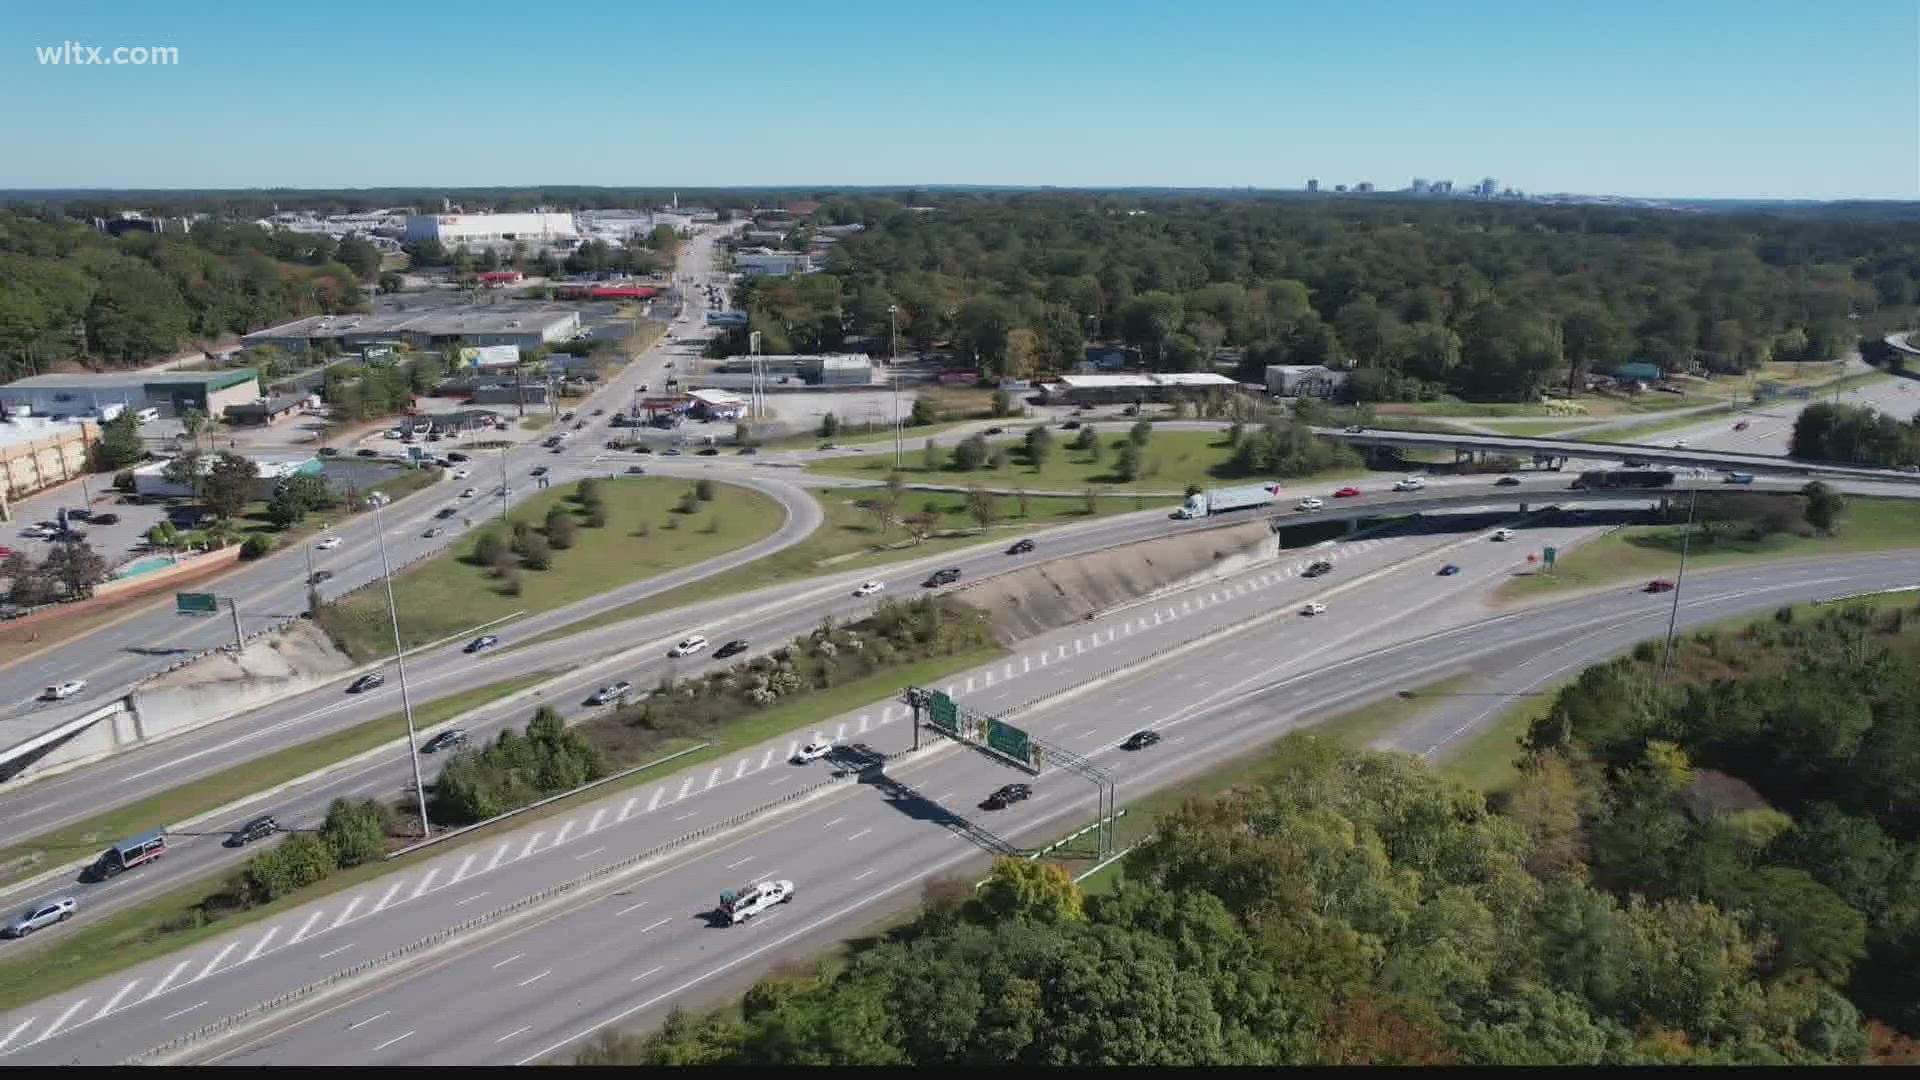 The intersection of Interstate 20, Interstate 26, and Interstate 126 near Columbia had been known as a traffic nightmare for years.